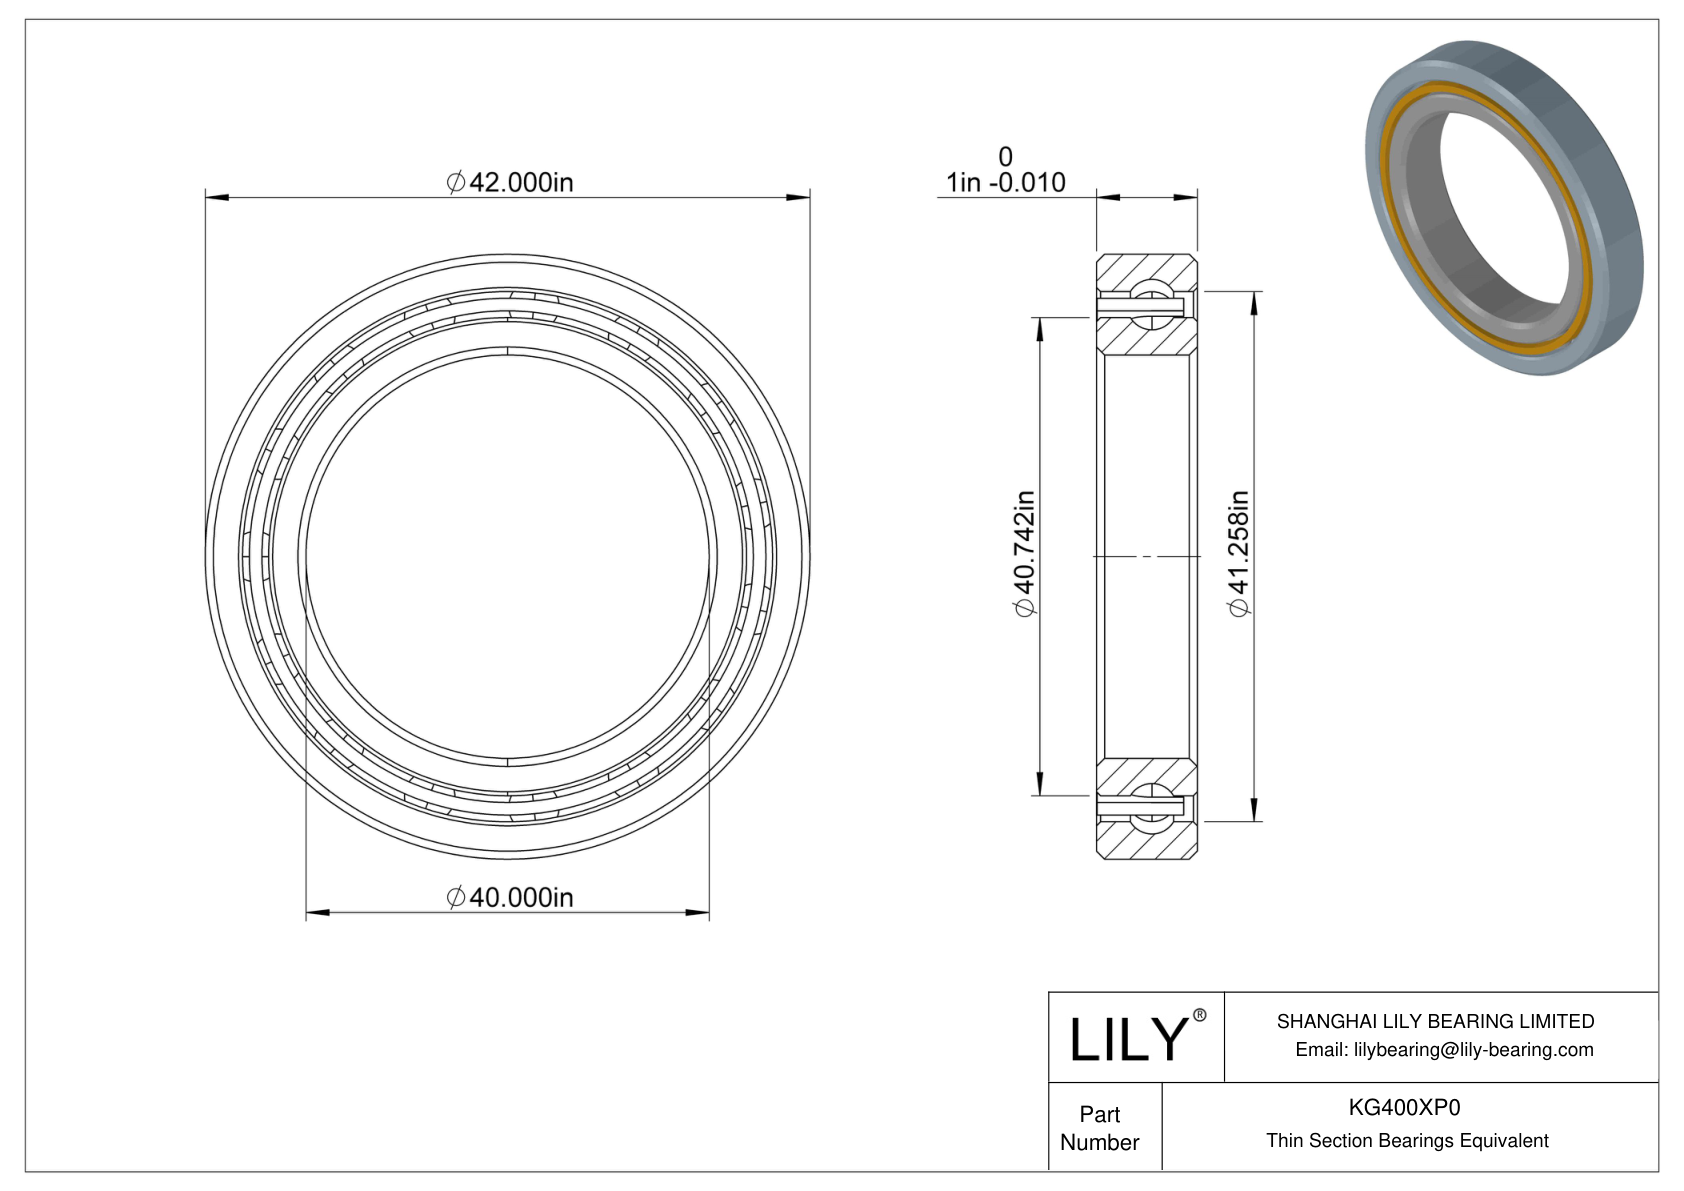 KG400XP0 Constant Section (CS) Bearings cad drawing